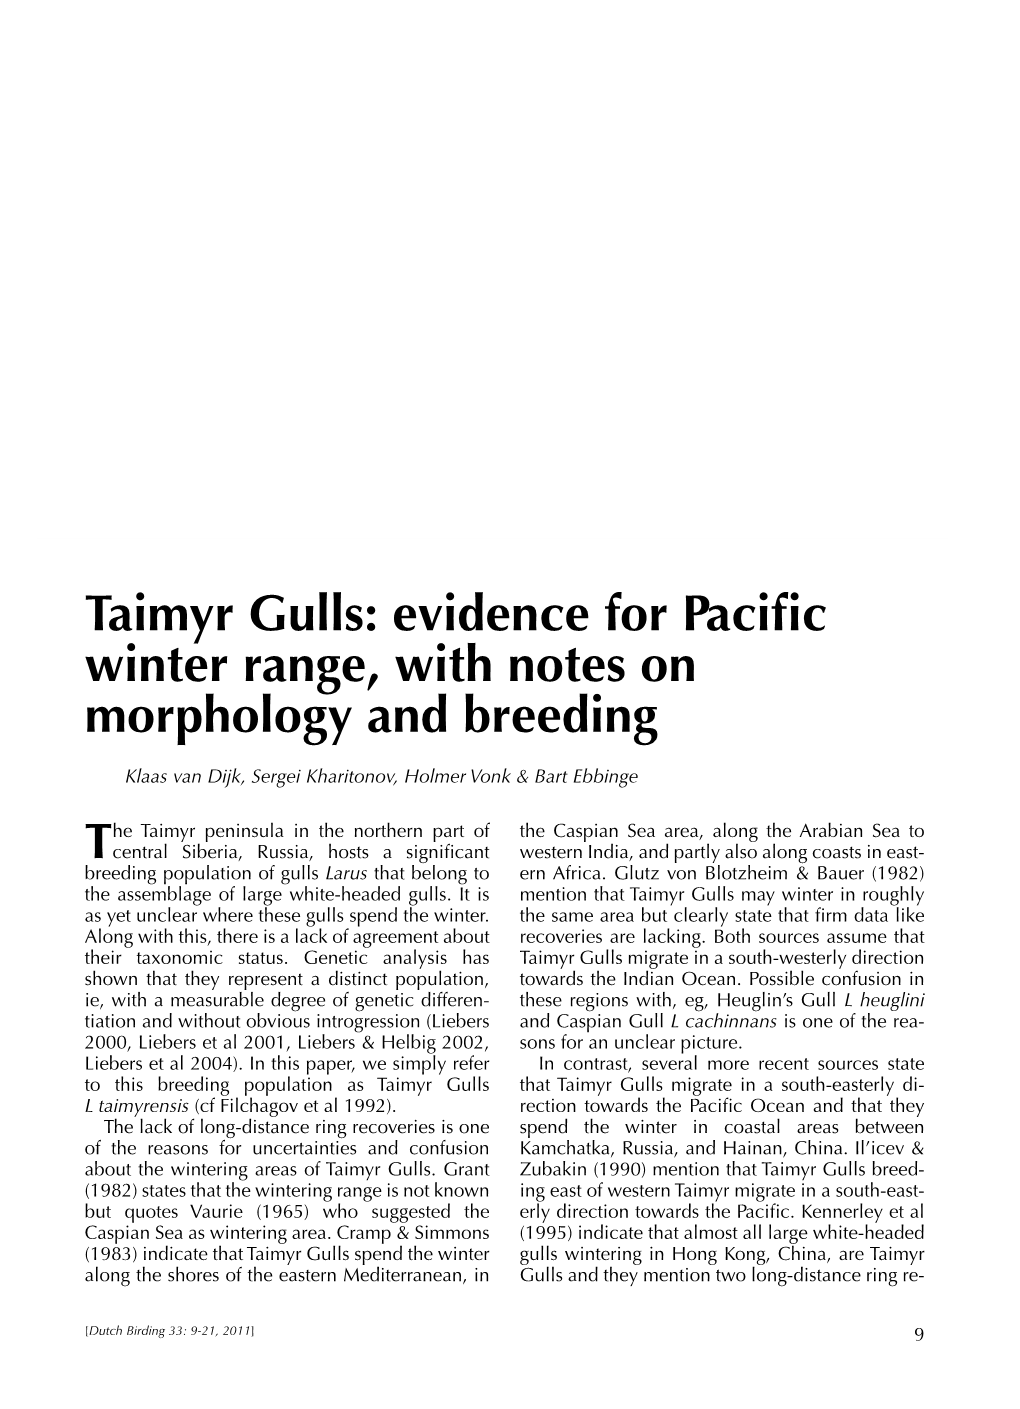 Taimyr Gulls: Evidence for Pacific Winter Range, with Notes on Morphology and Breeding